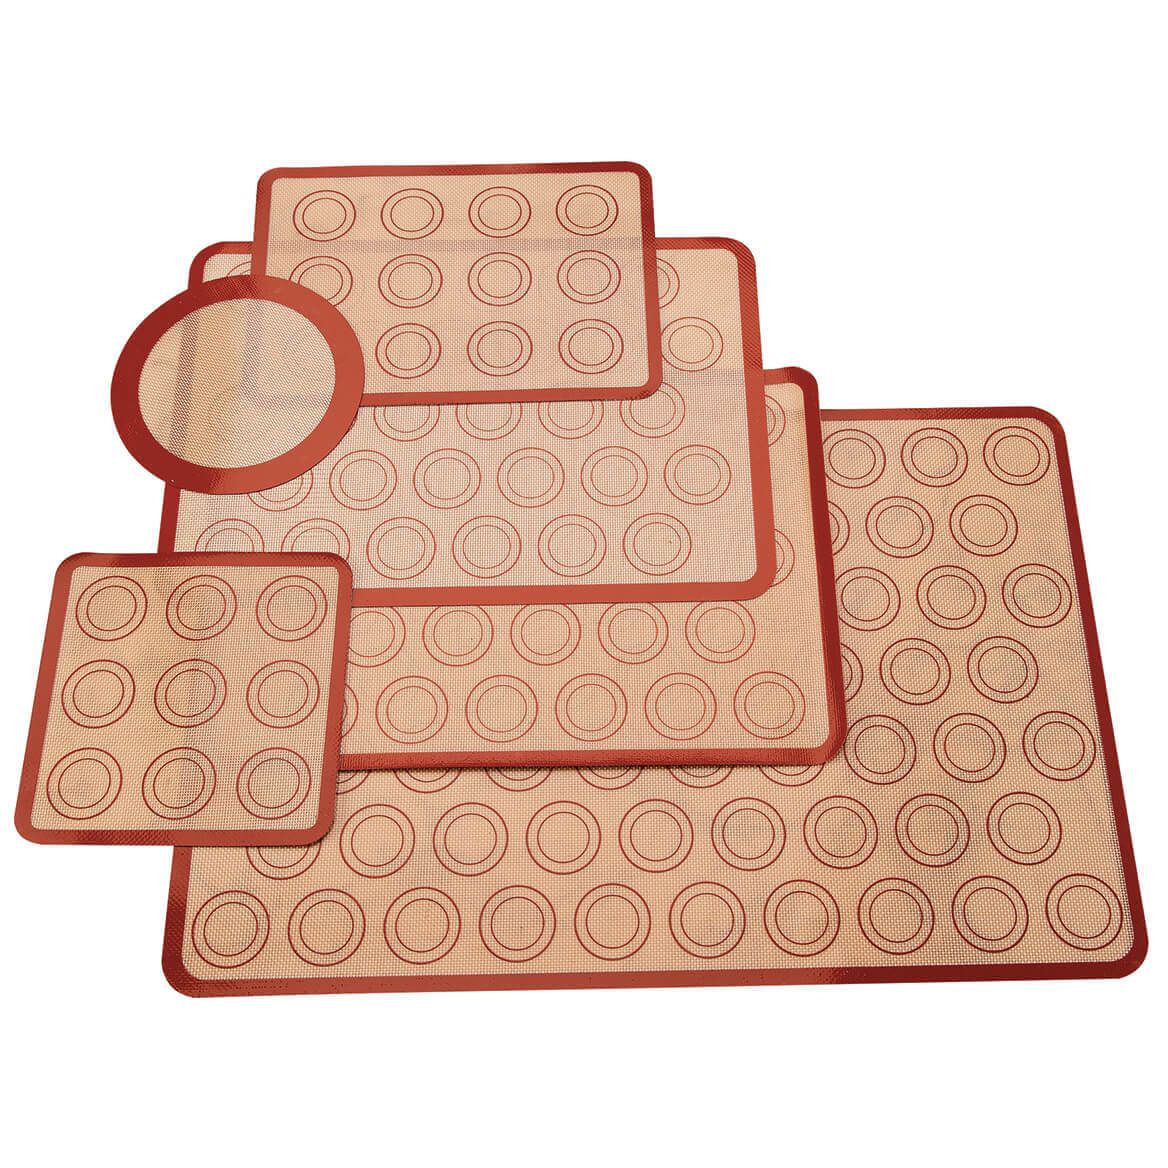 Silicone Baking Mats by Home Marketplace™, Set of 6 + '-' + 374222